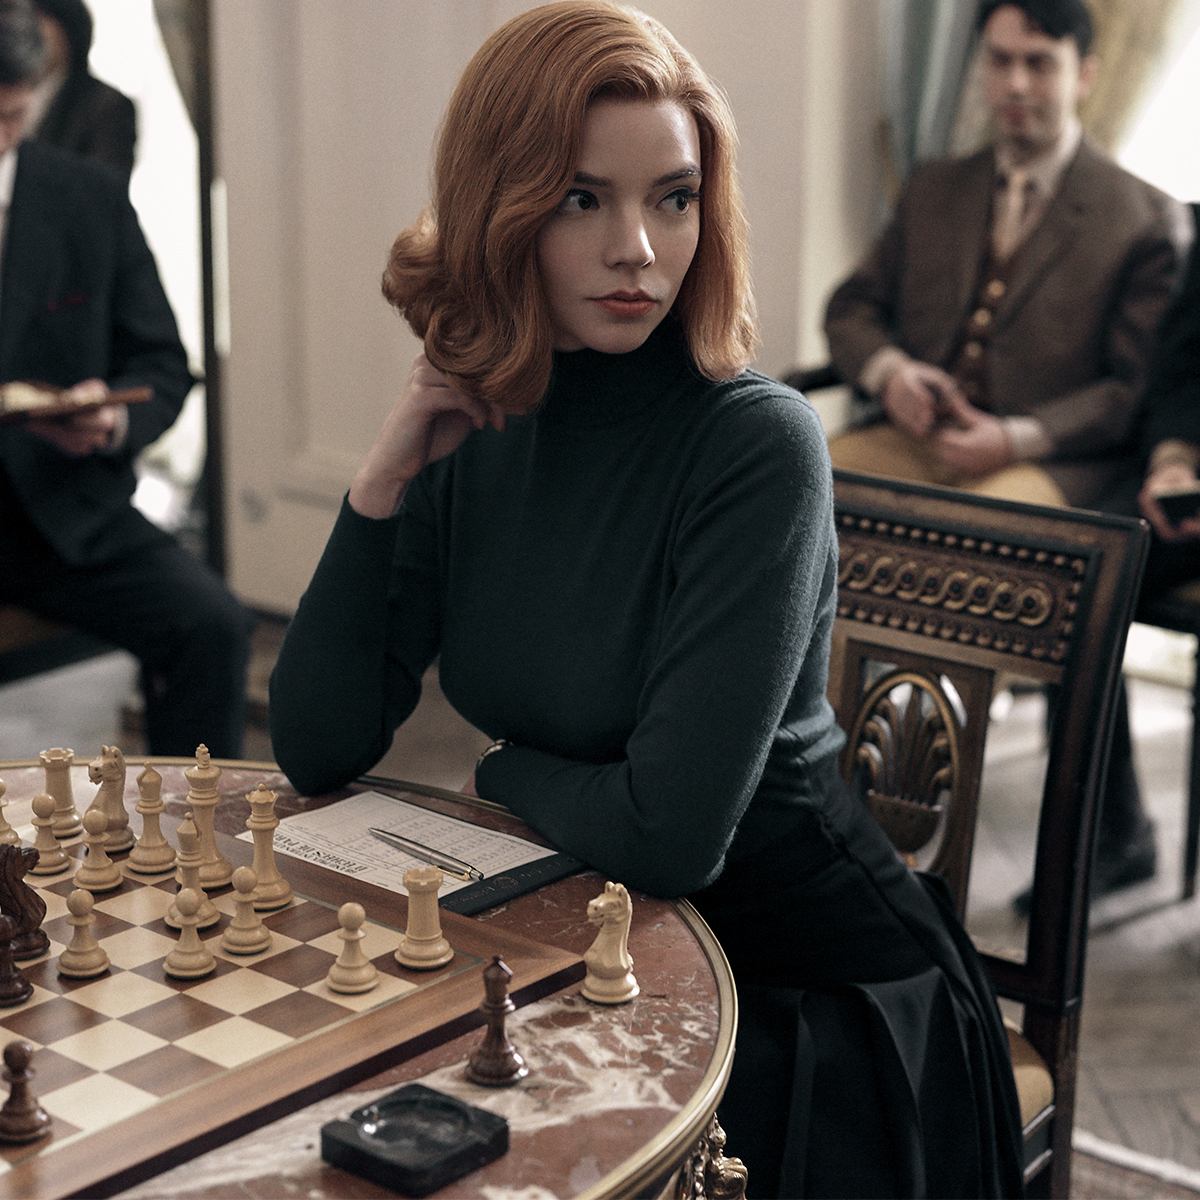 The Queen's Gambit is Reportedly Netflix's Most-Watched Limited